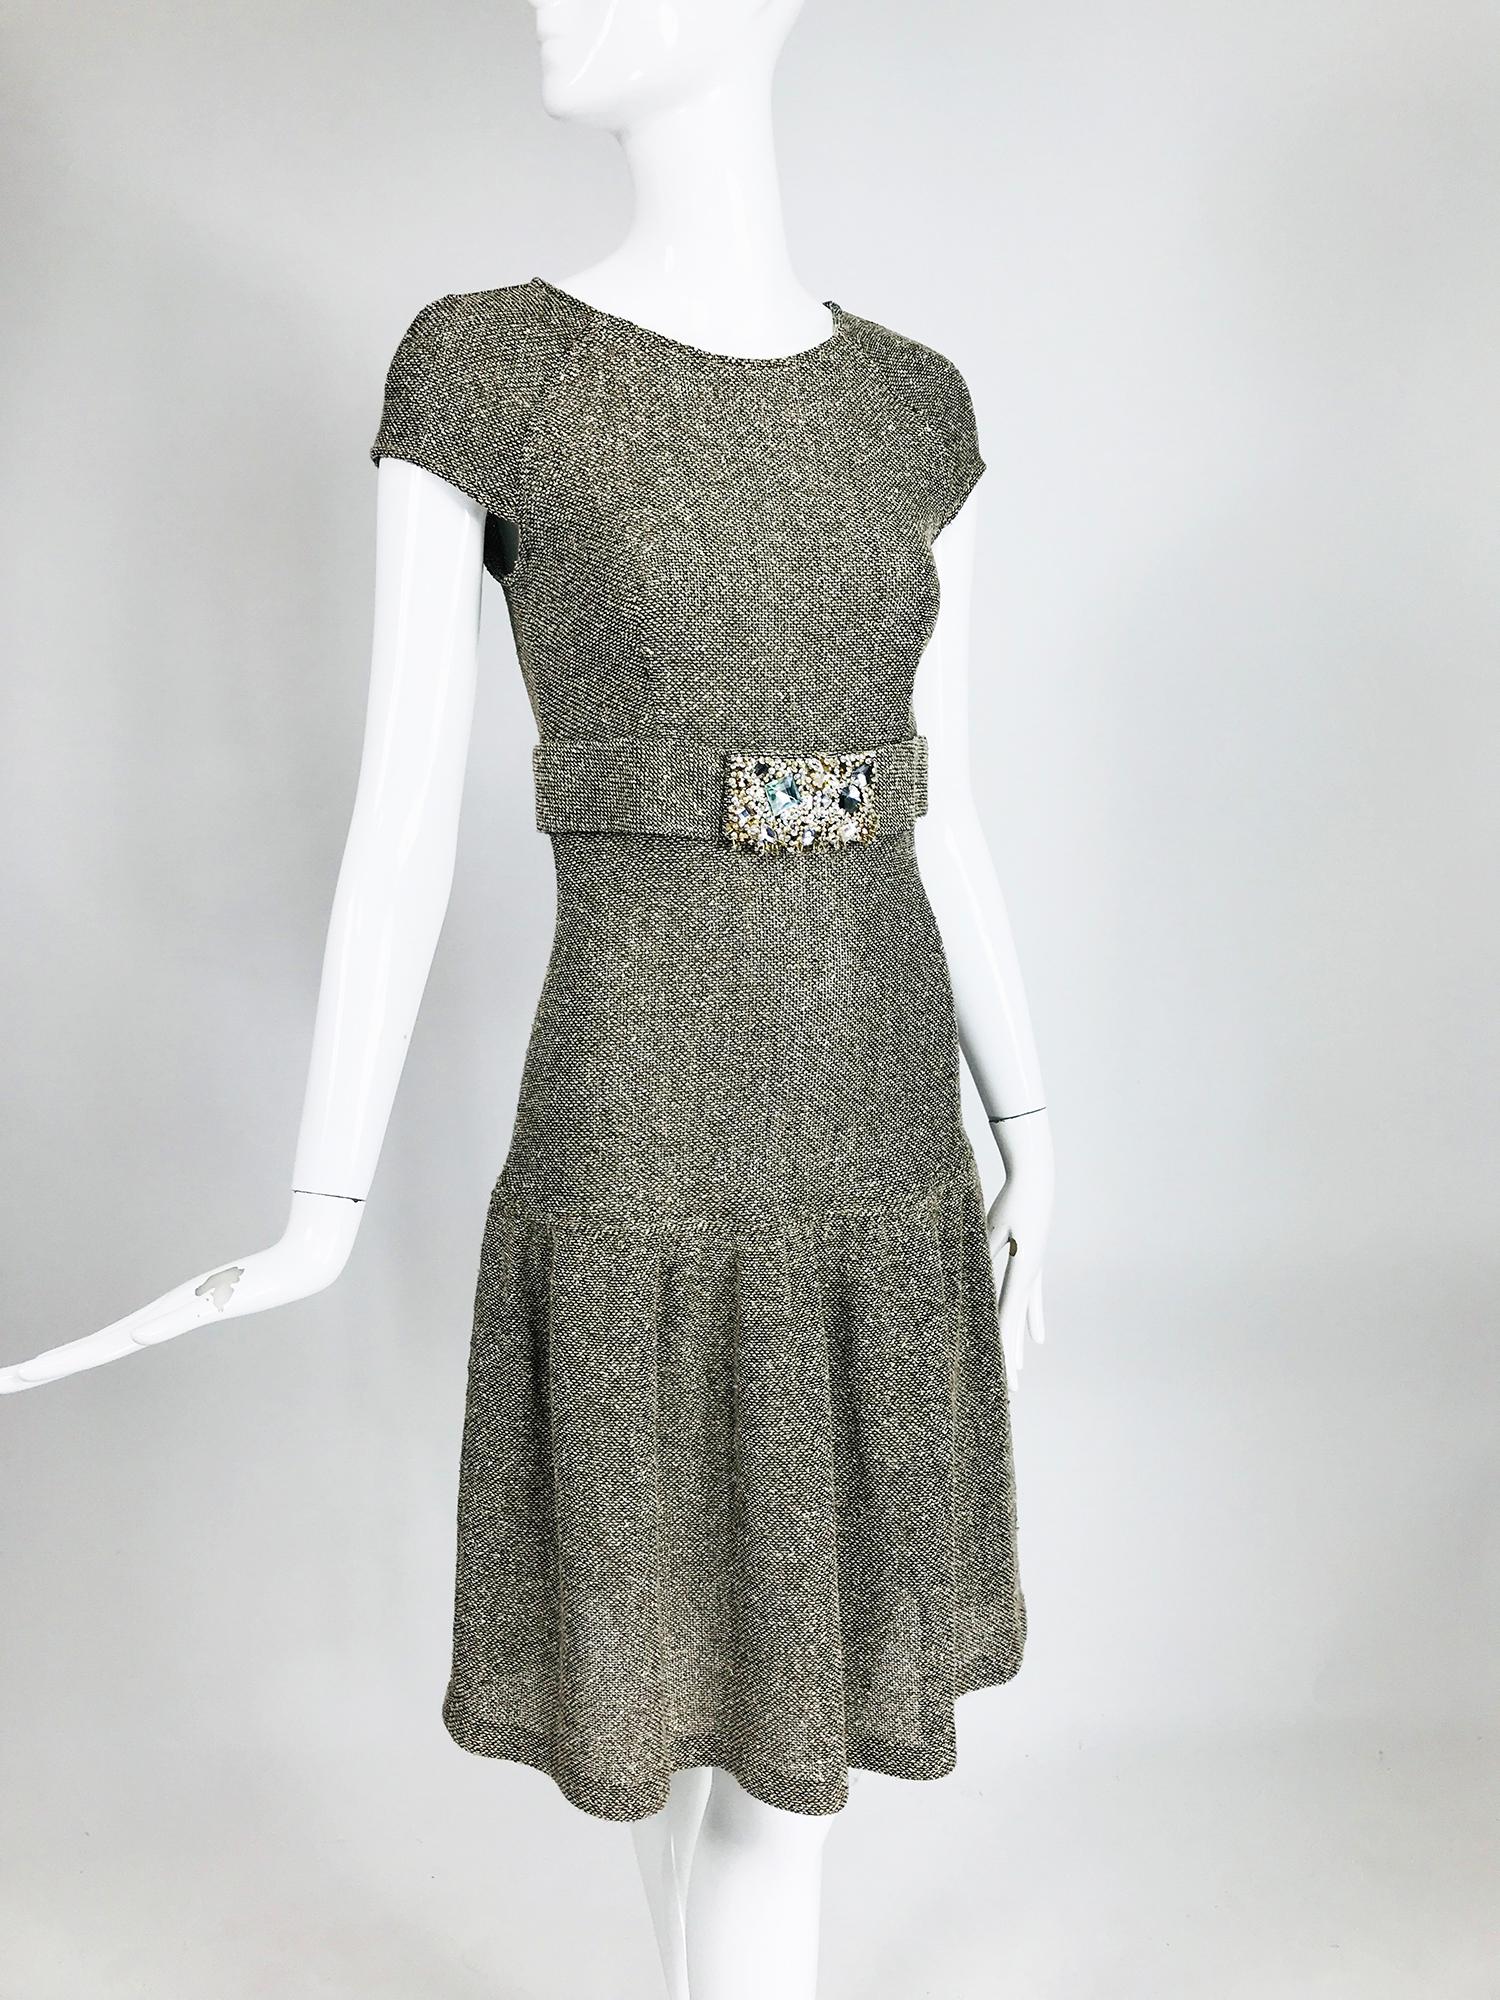 Valentino silk tweed jewel belt dress. Soft 70% silk 30% wool tweed in taupe, back and cream, woven with a bit of stretch. The dress has a round open neckline and cap sleeves, the torso is fitted to below the hip with a gathered skirt below. A wide